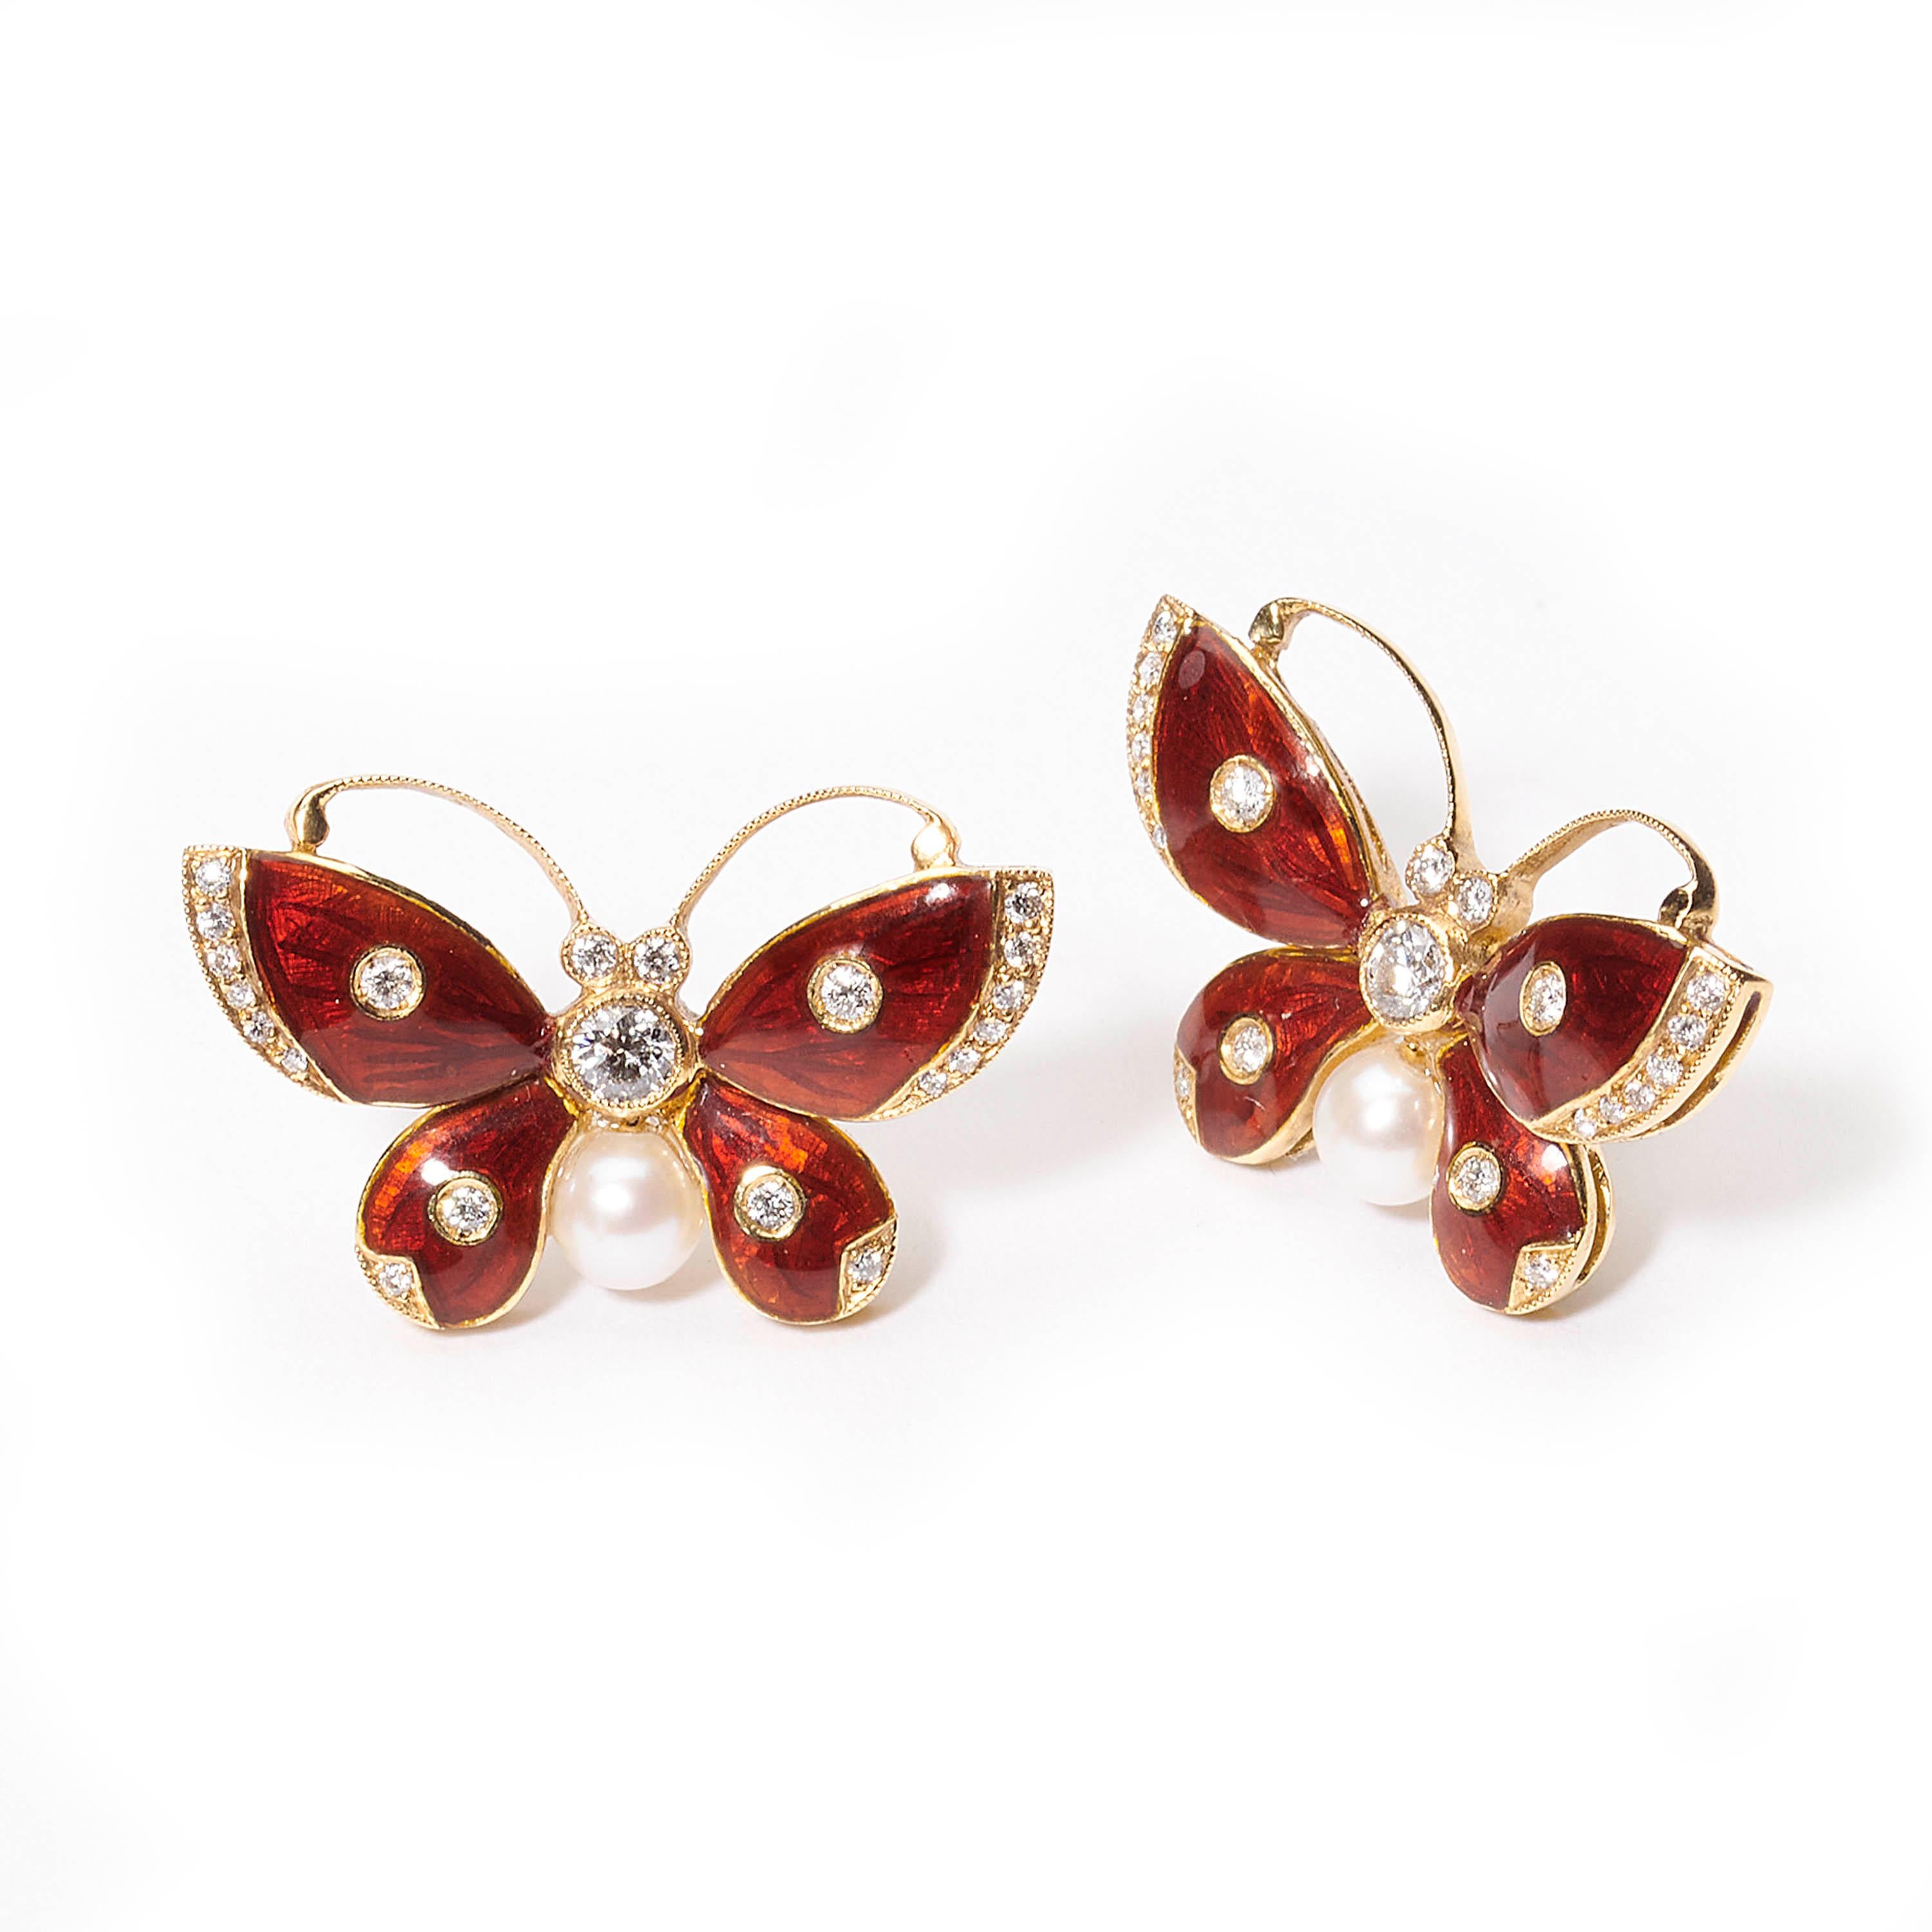 A pair of modern, red guilloche enamel butterfly earrings set with 0.50ct of round brilliant-cut diamonds with a pearl in each, mounted in yellow gold, with posts and butterfly fittings.